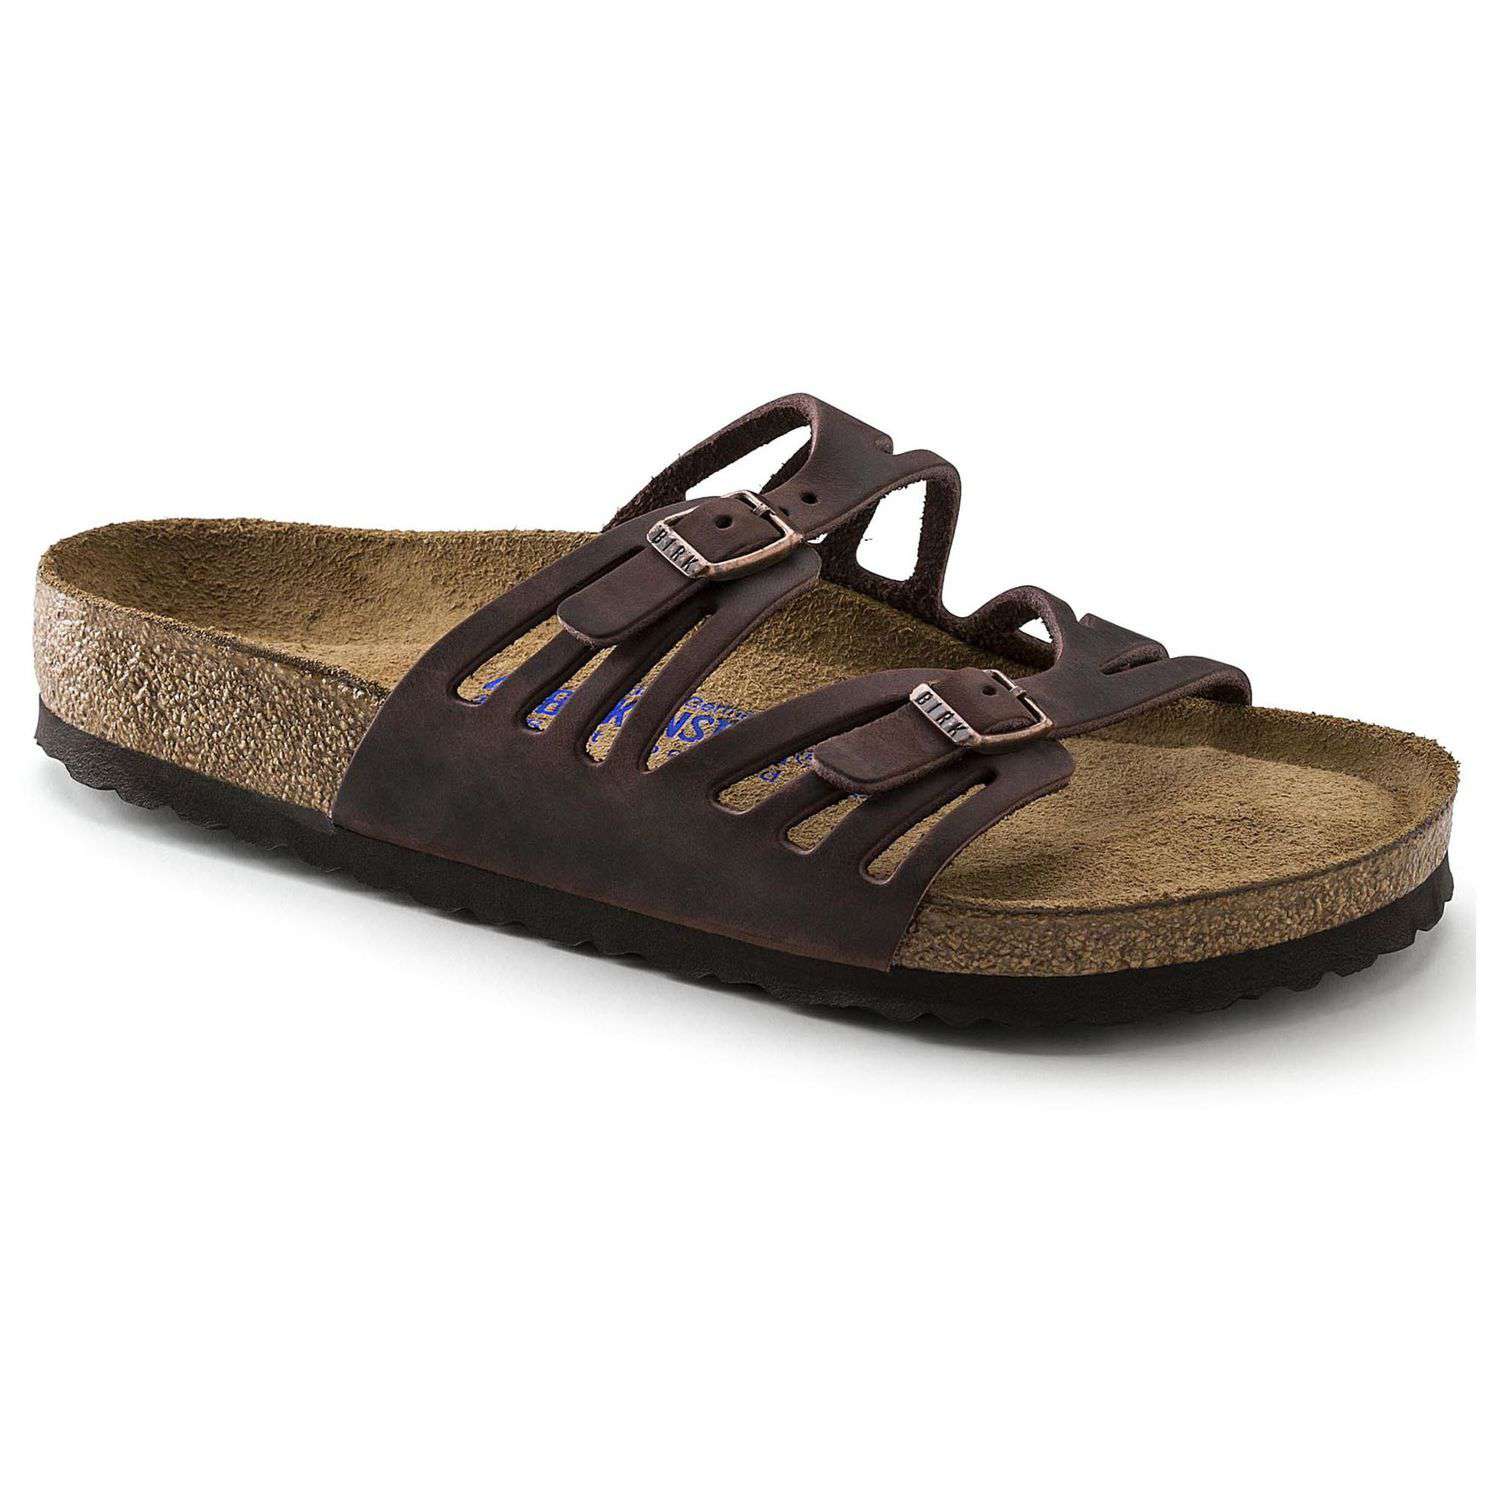 Birkenstock Granada Sandal in Habana Oiled Leather with Soft Footbed